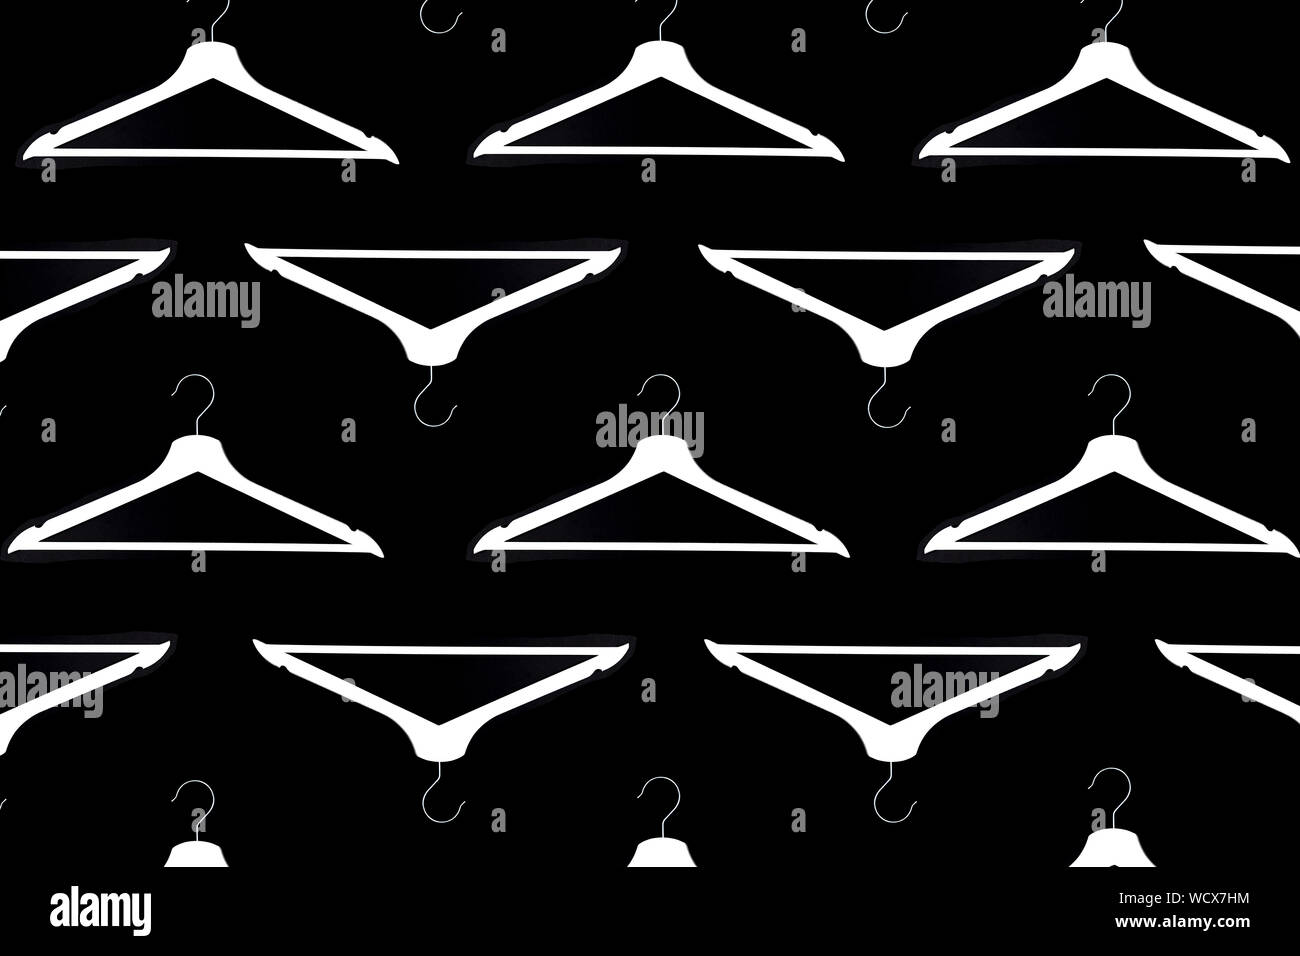 Fashion clothes hanger pattern on black background. Stock Photo